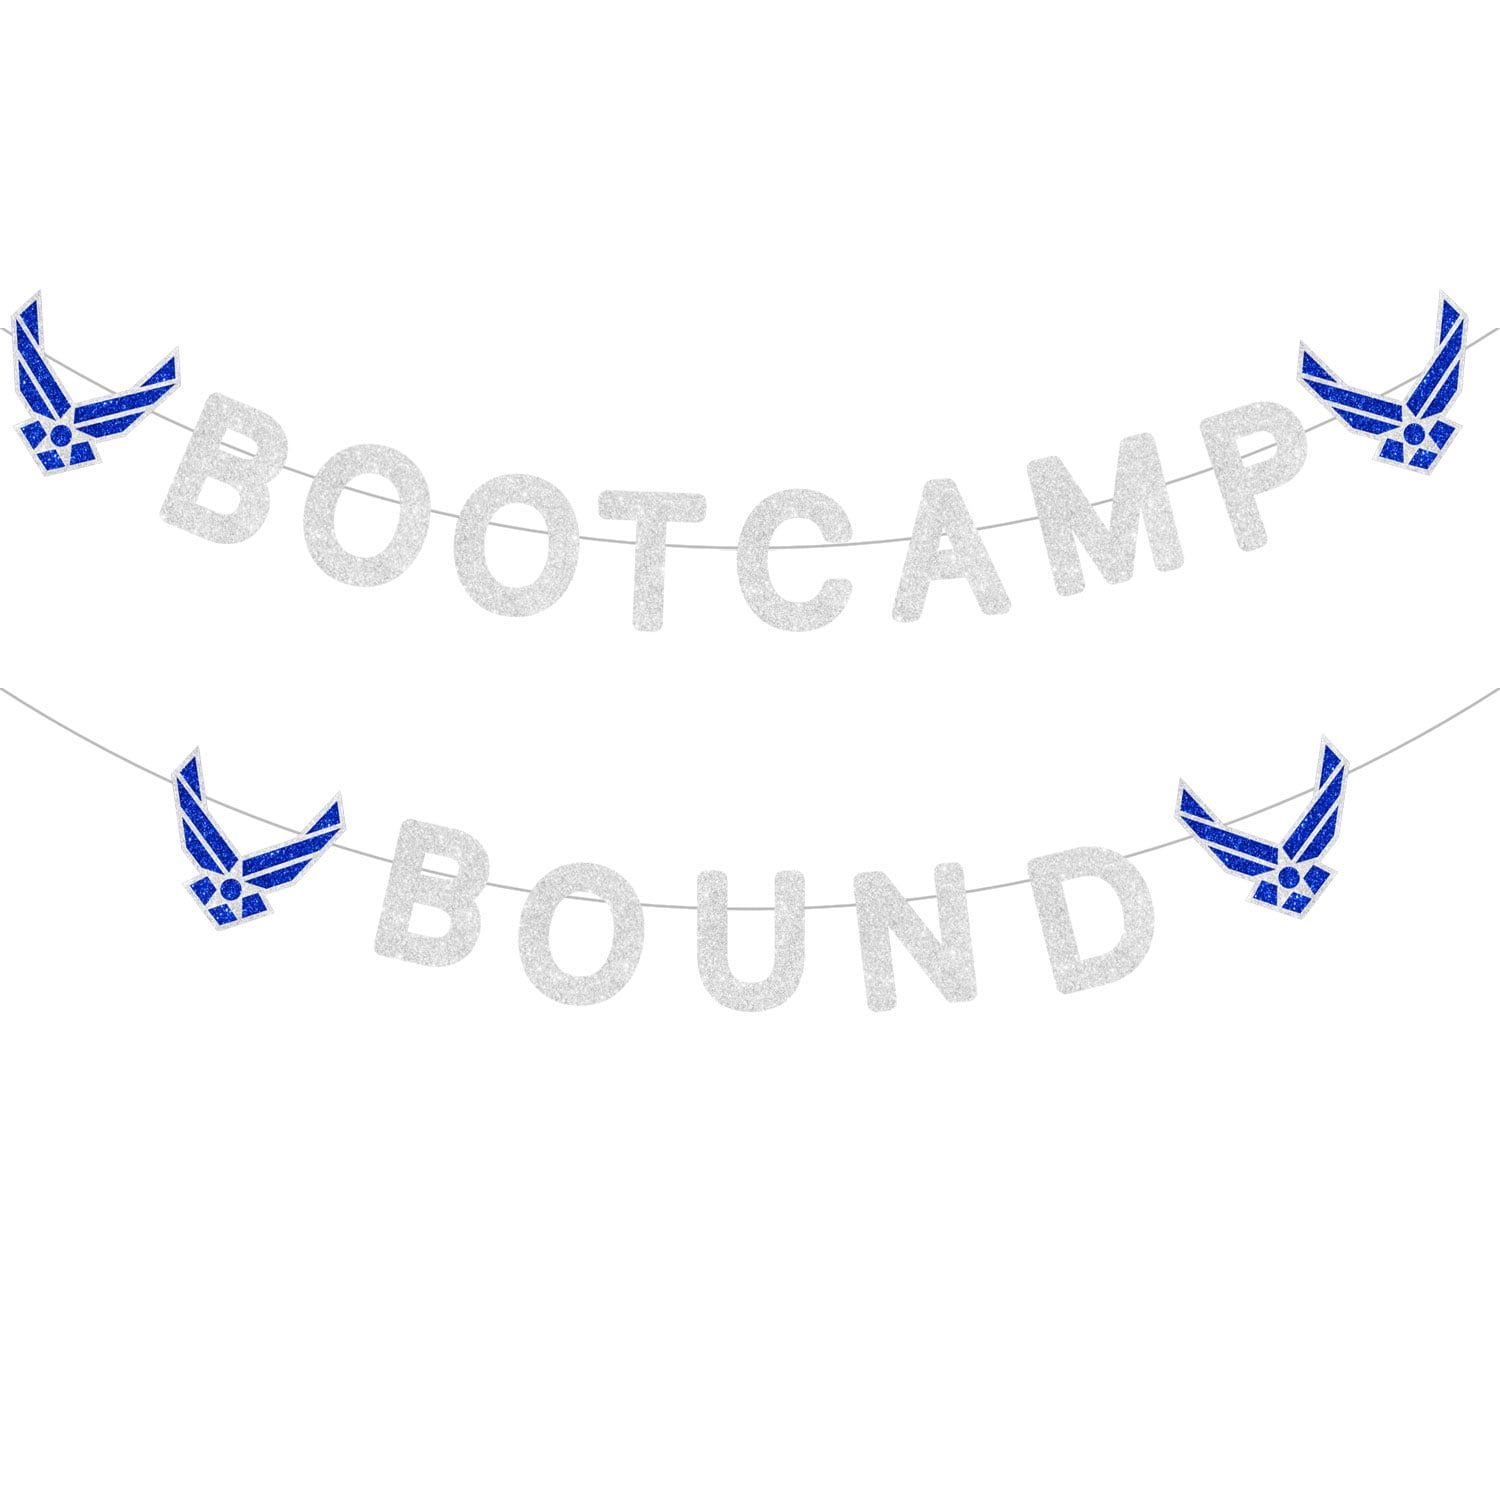 Navy Boot Camp Bound 10 Card Boxed Set for Your Loved One as 